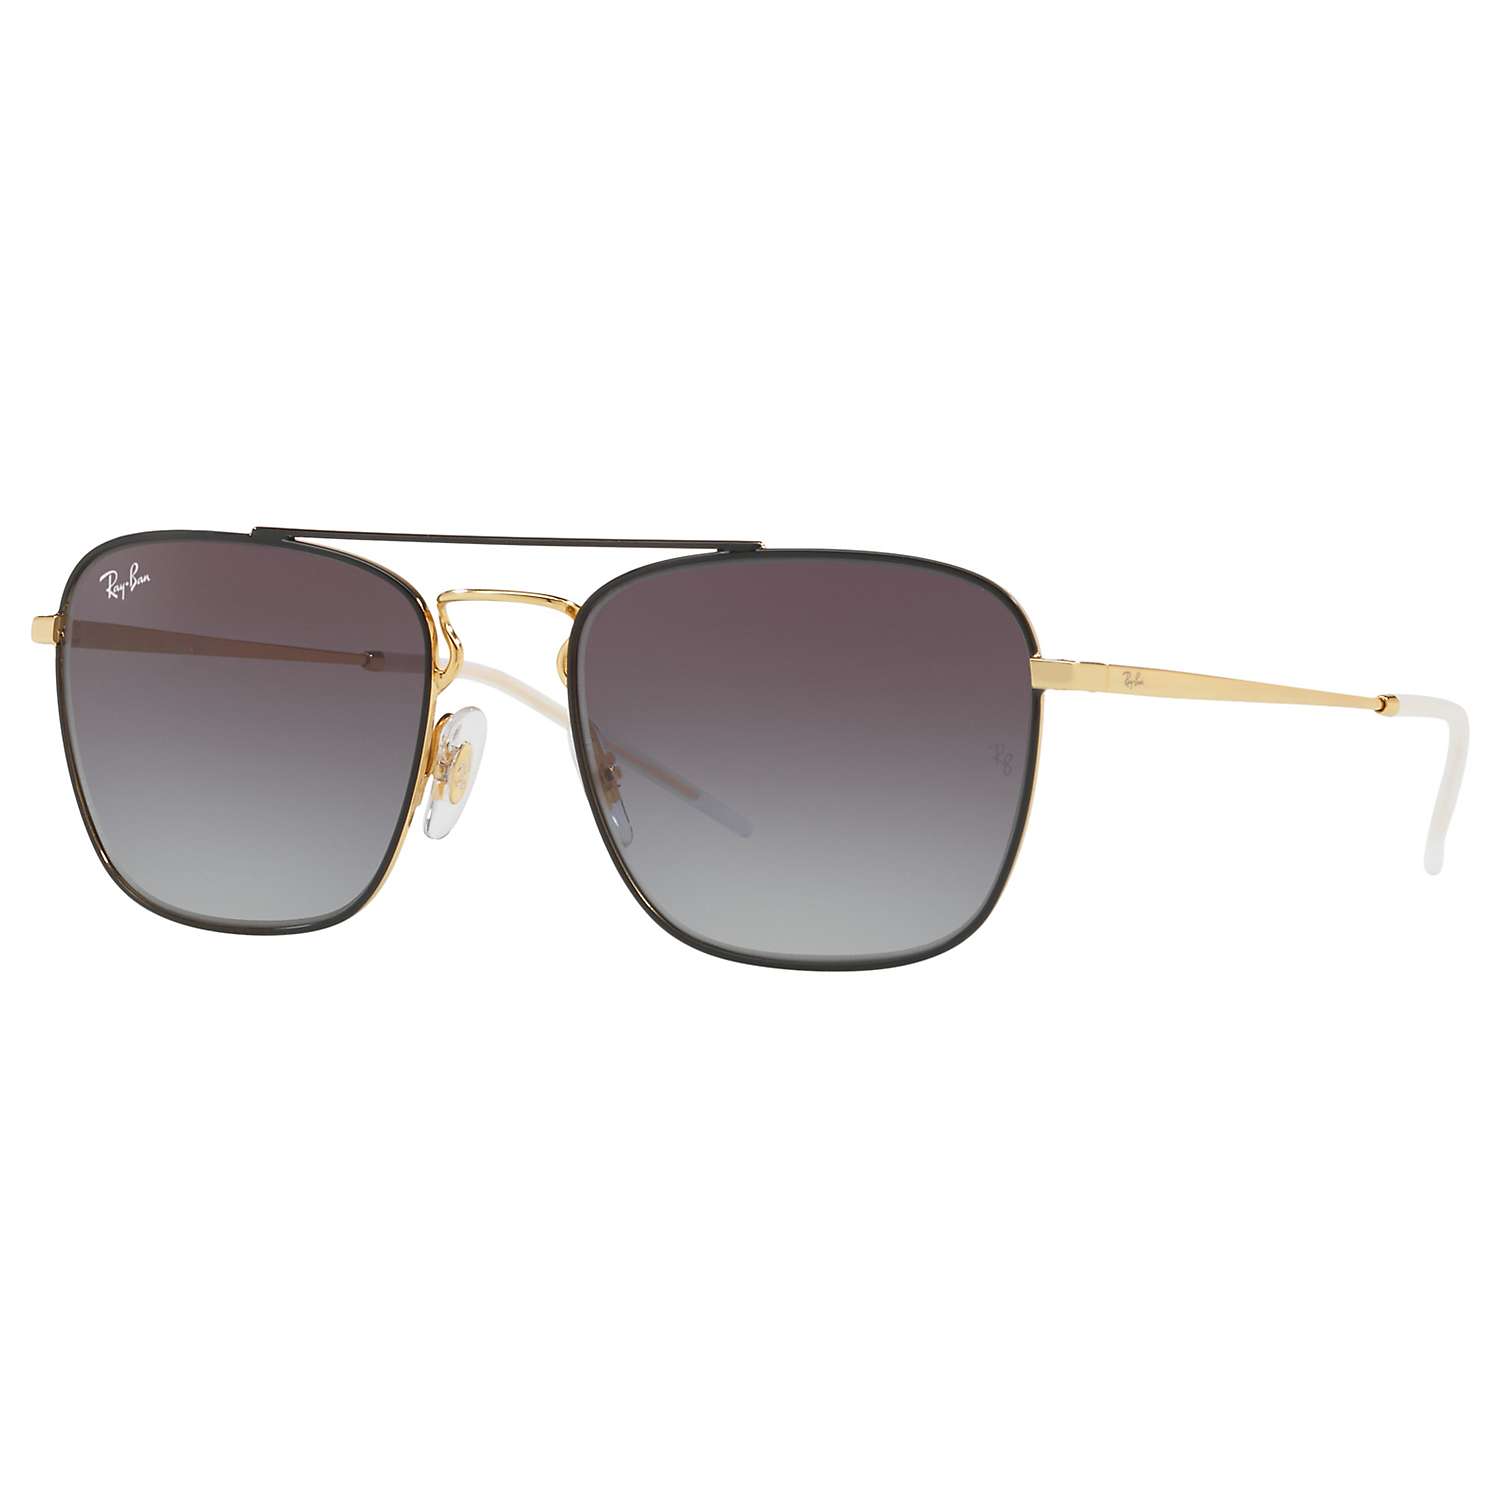 Buy Ray-Ban RB3588 Men's Square Sunglasses Online at johnlewis.com